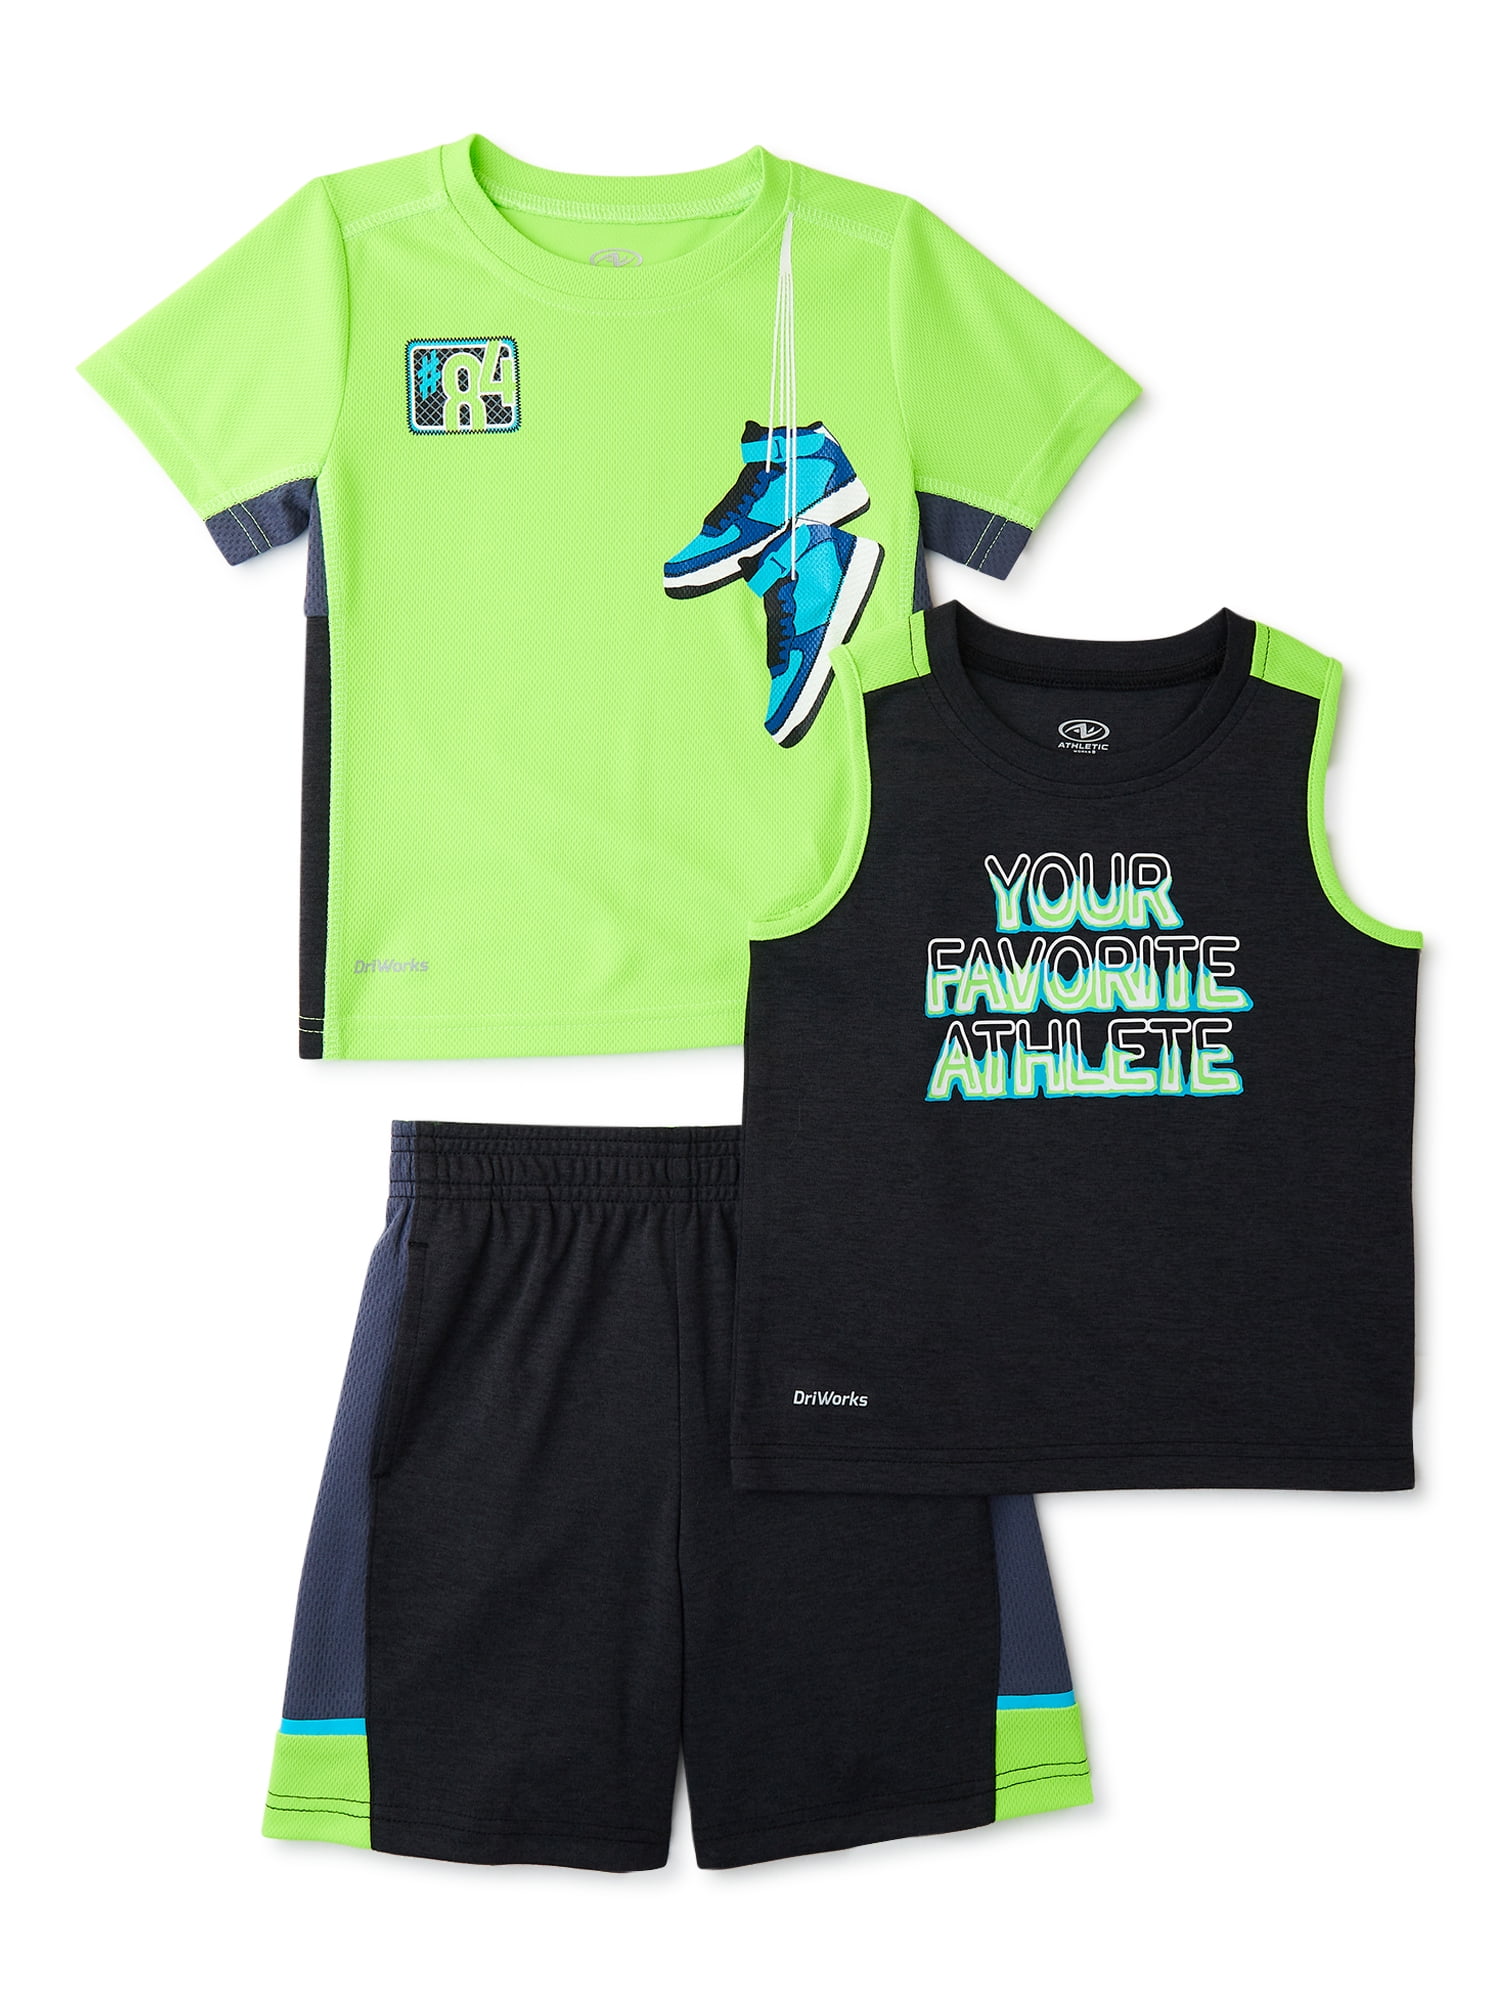 Rookie of The Year | New York Pro Basketball Baby Bodysuits or Toddler Tees Royal / 12M